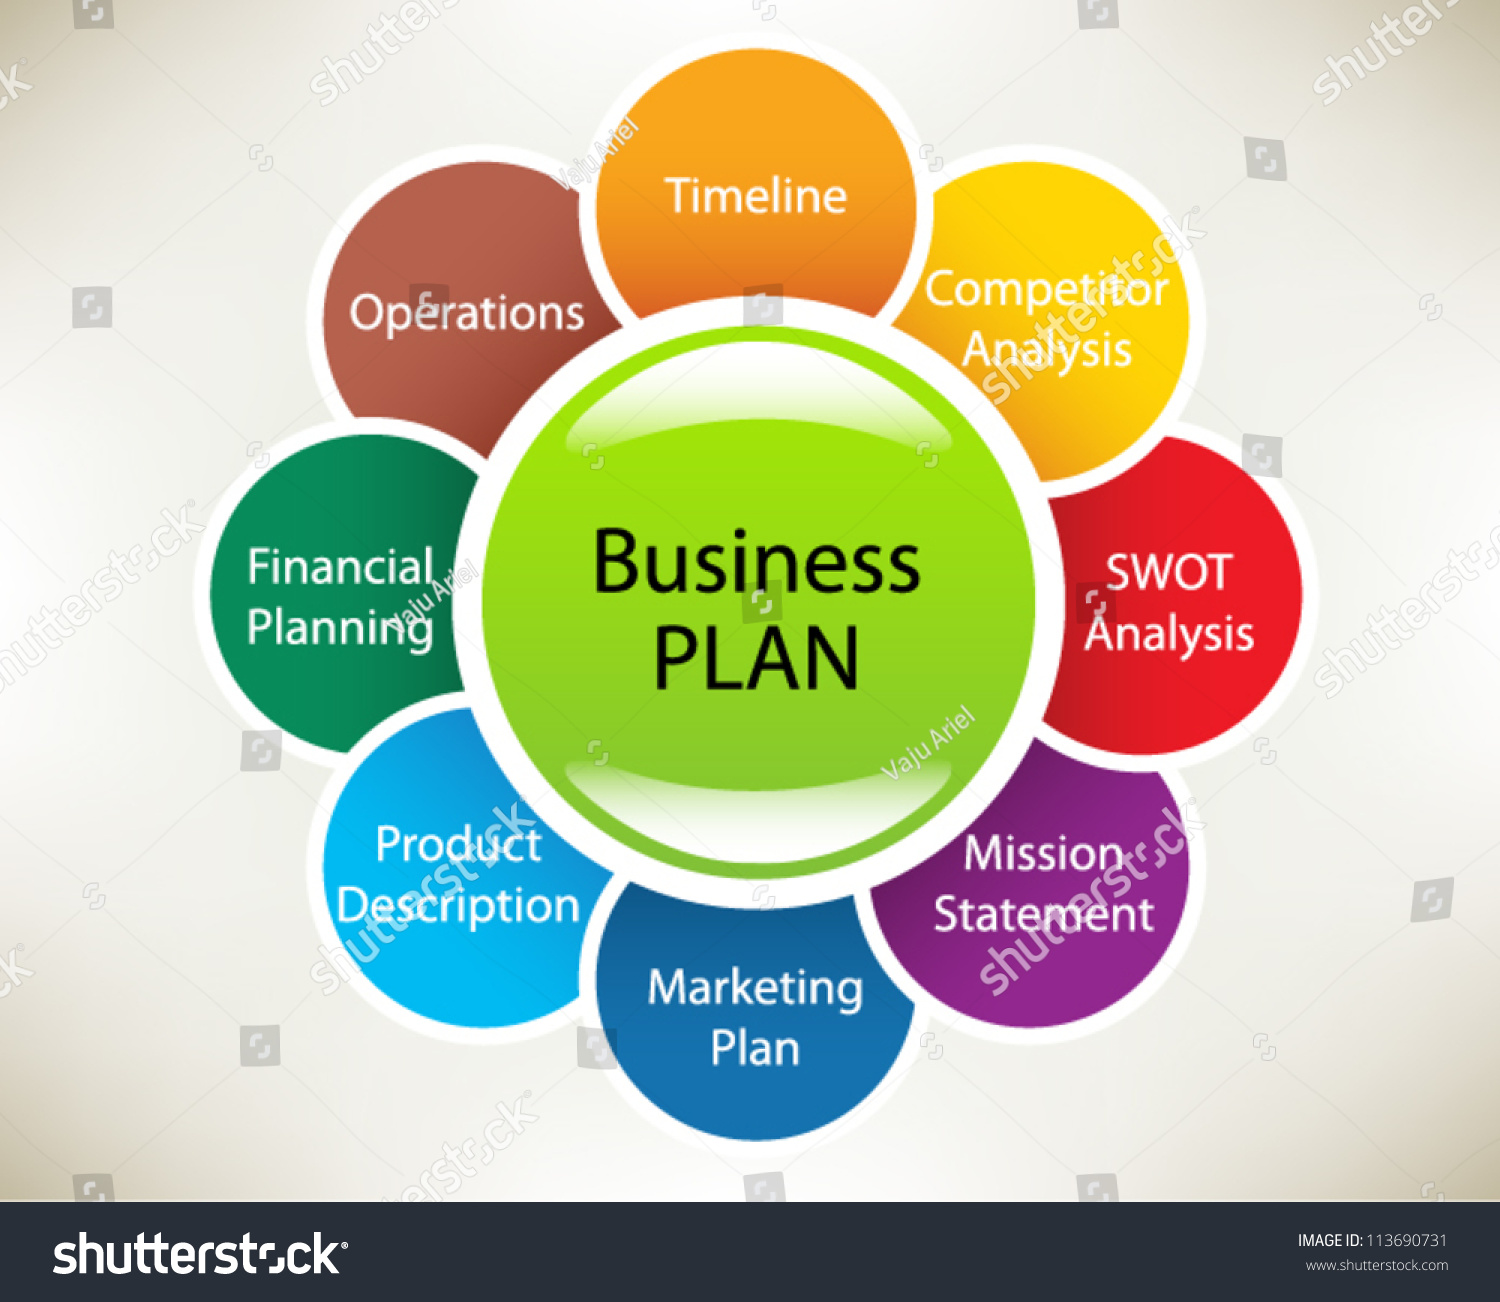 SWOT analysis and business planning